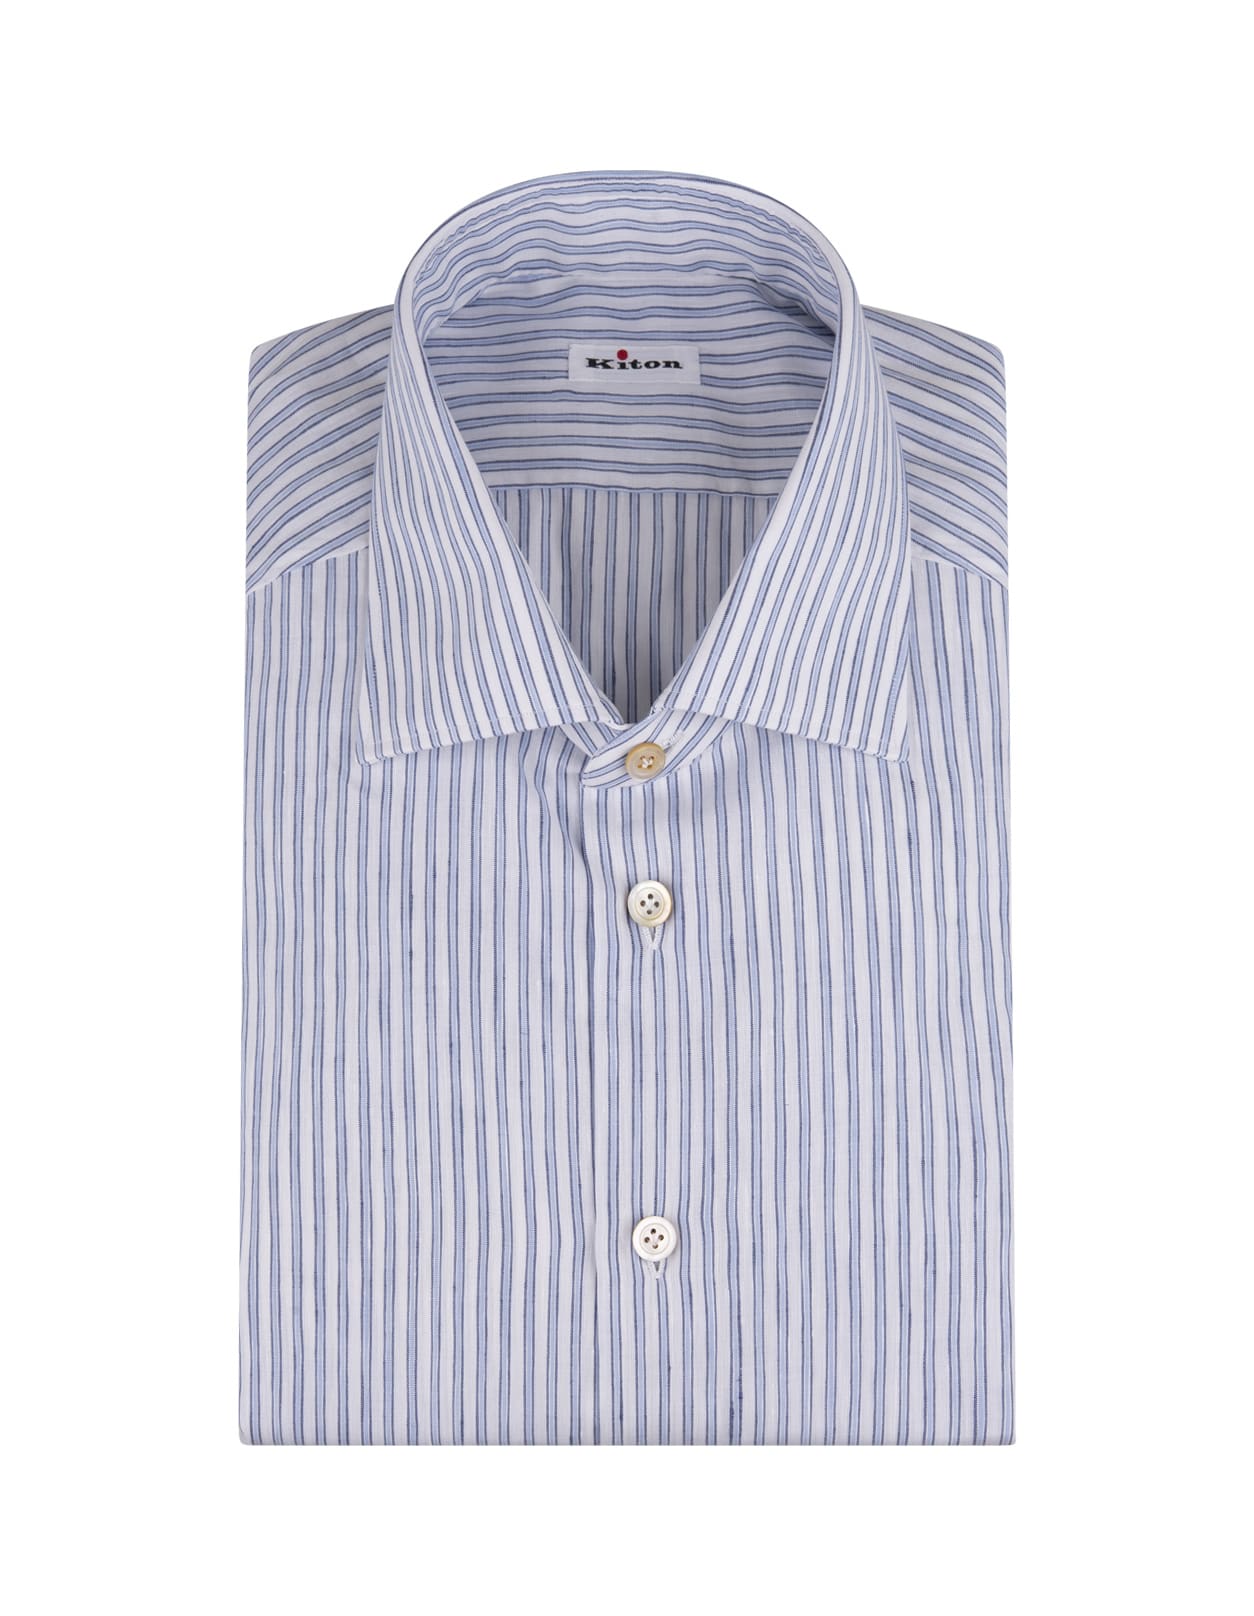 KITON WHITE AND LIGHT BLUE STRIPED COTTON AND LINEN SHIRT